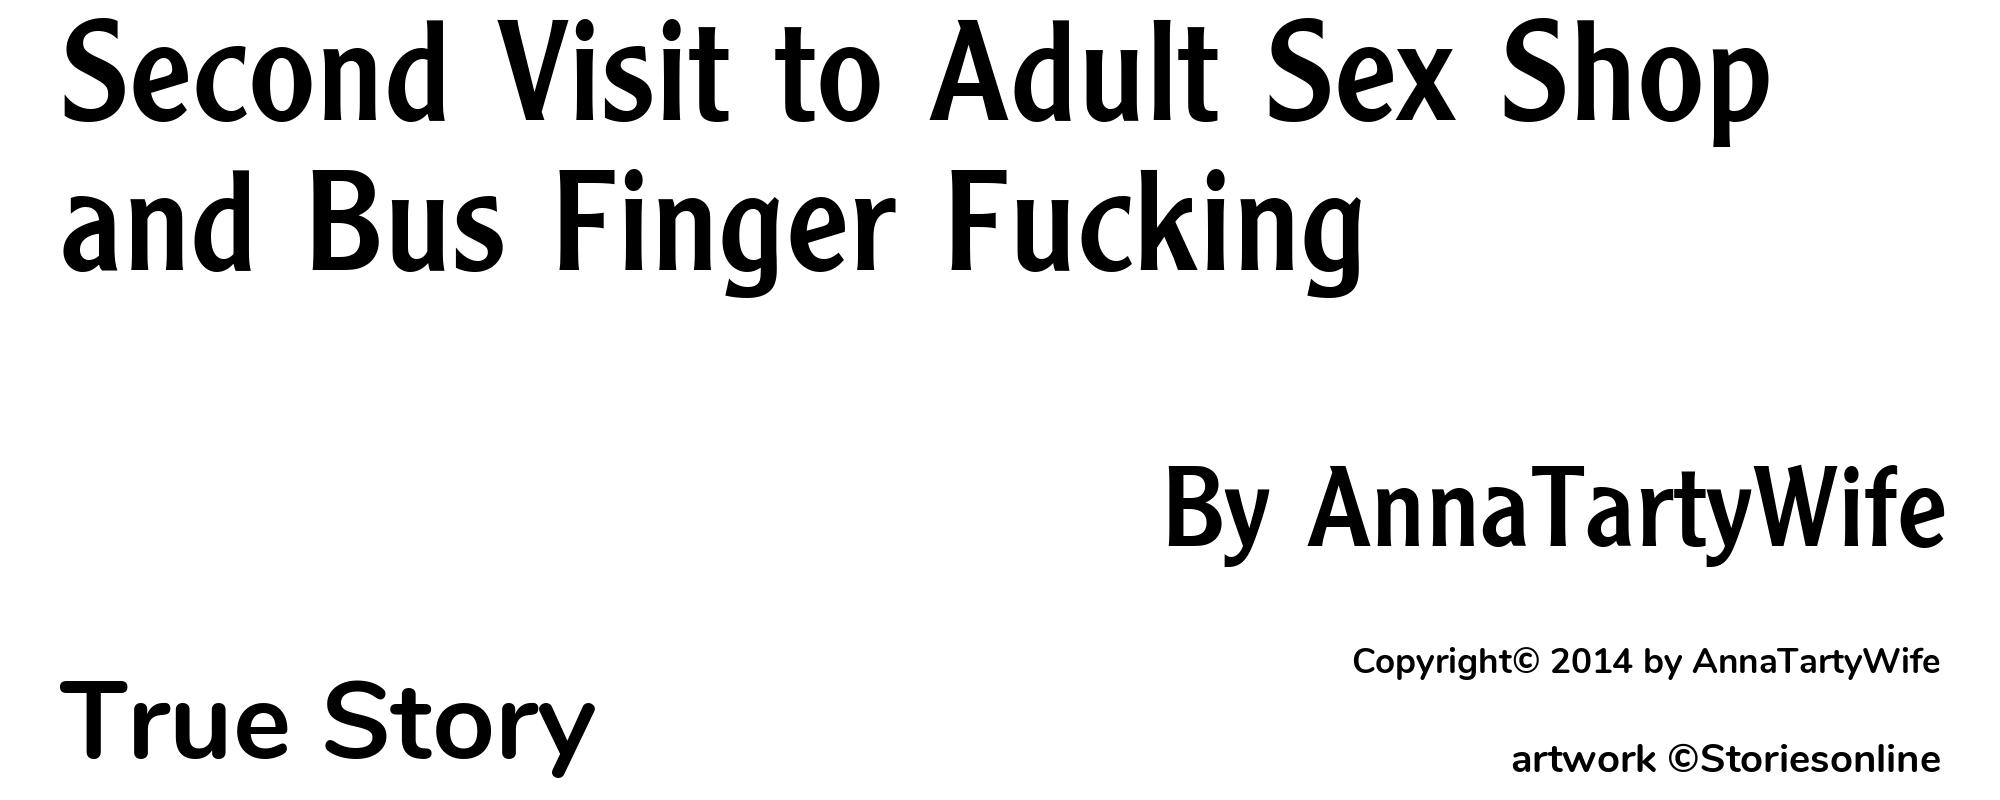 Second Visit to Adult Sex Shop and Bus Finger Fucking - Cover